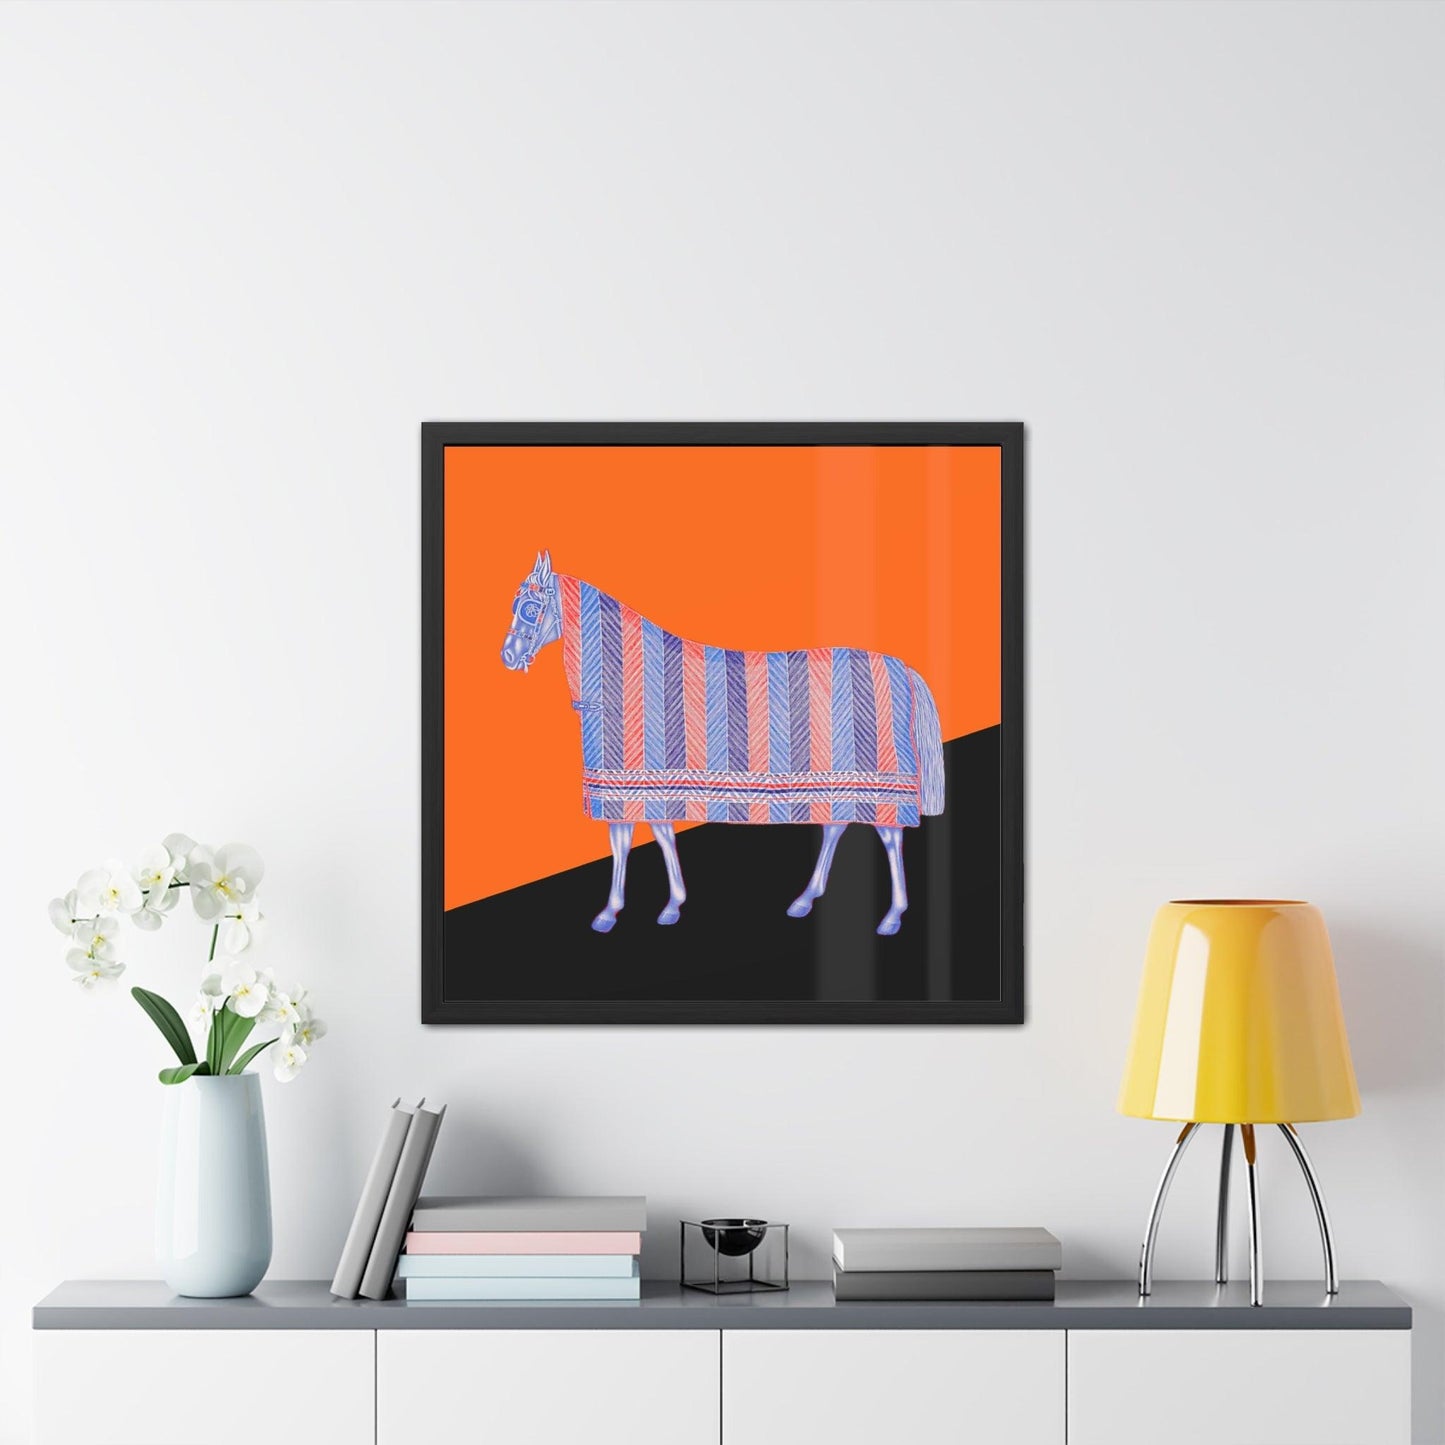 House of Horse Framed Poster Wall Art House of Horse Framed Poster Wall Art 